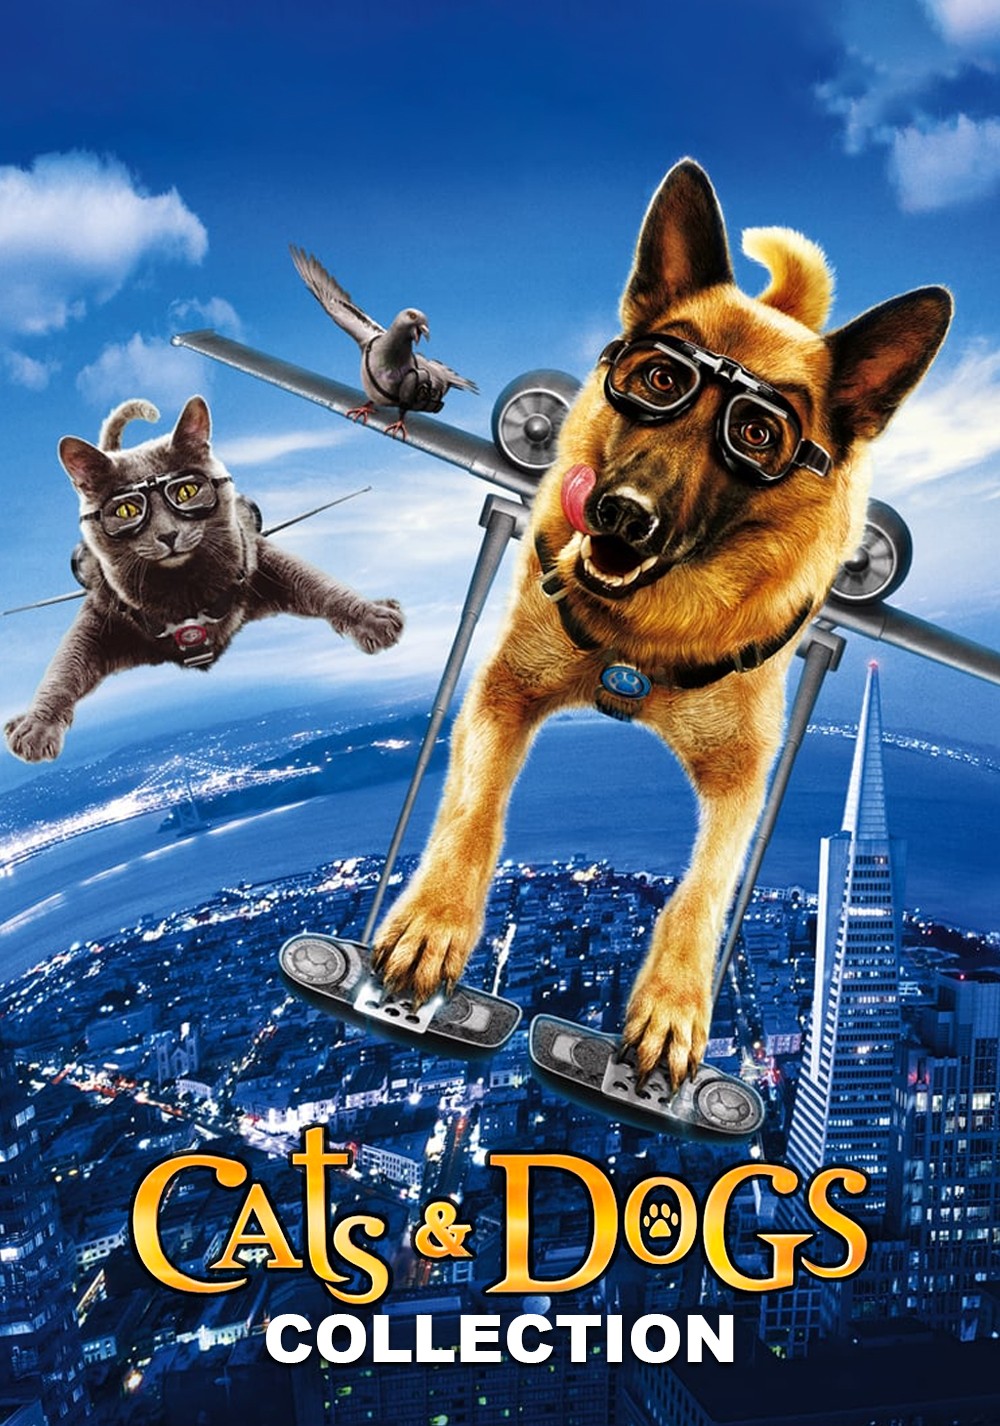 Cats and Dogs Plex Collection Posters